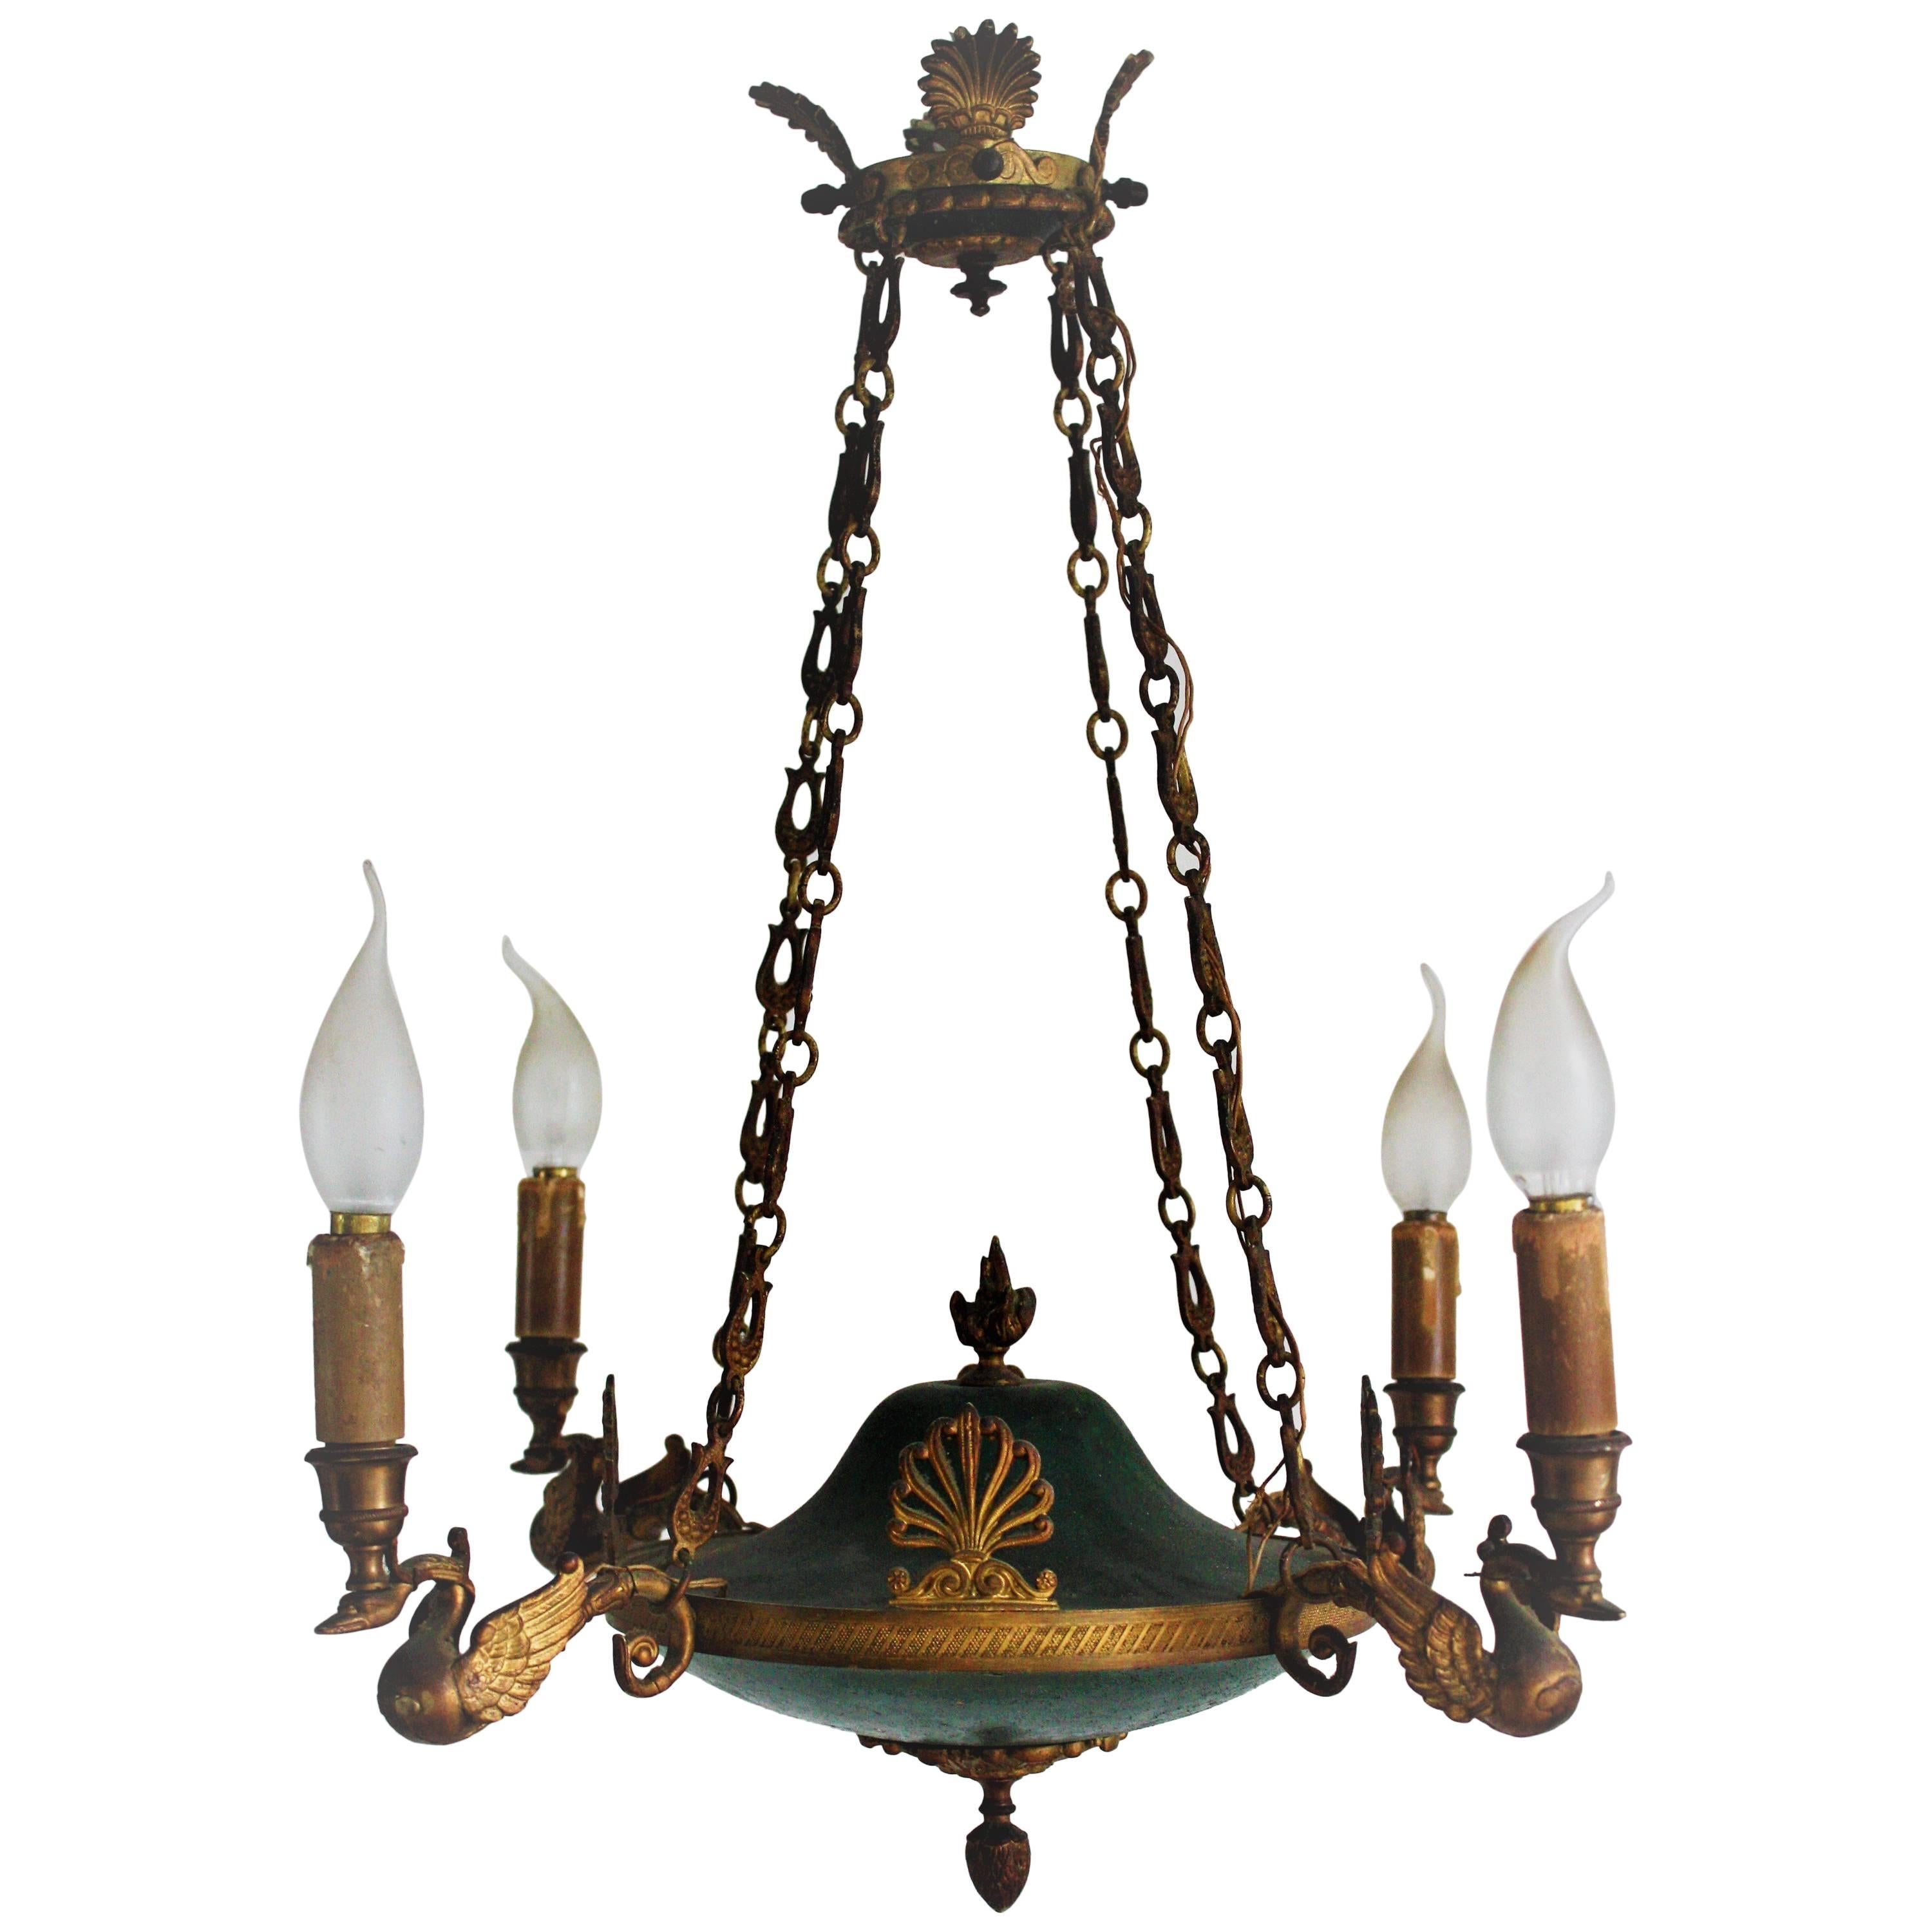 19th Century Empire Style Four-Light Chandelier, France, circa 1870s